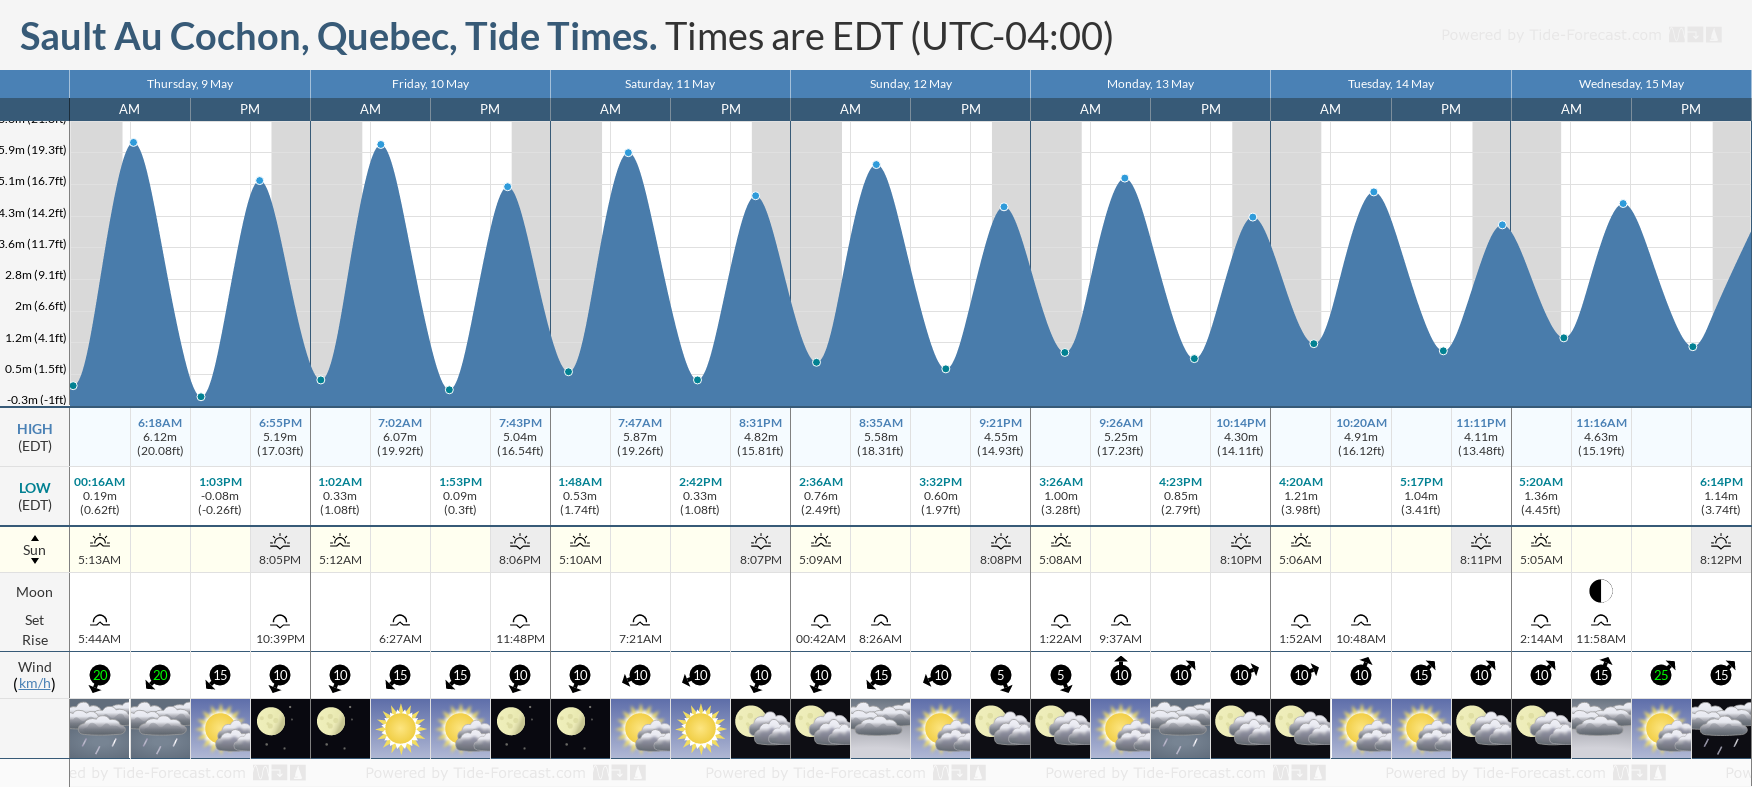 Sault Au Cochon, Quebec Tide Chart including high and low tide tide times for the next 7 days